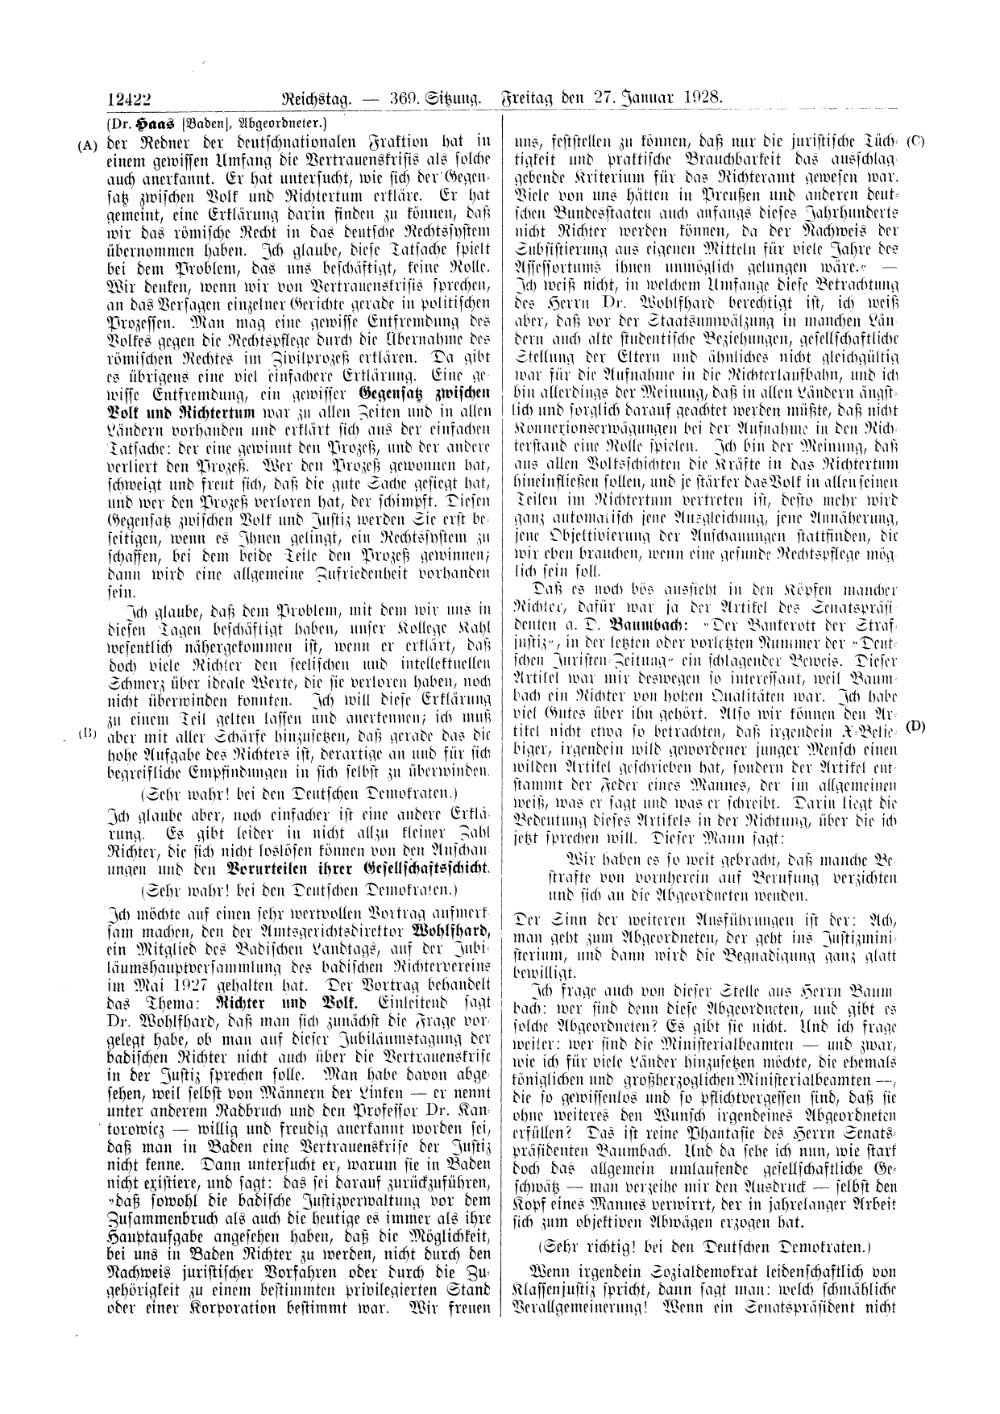 Scan of page 12422